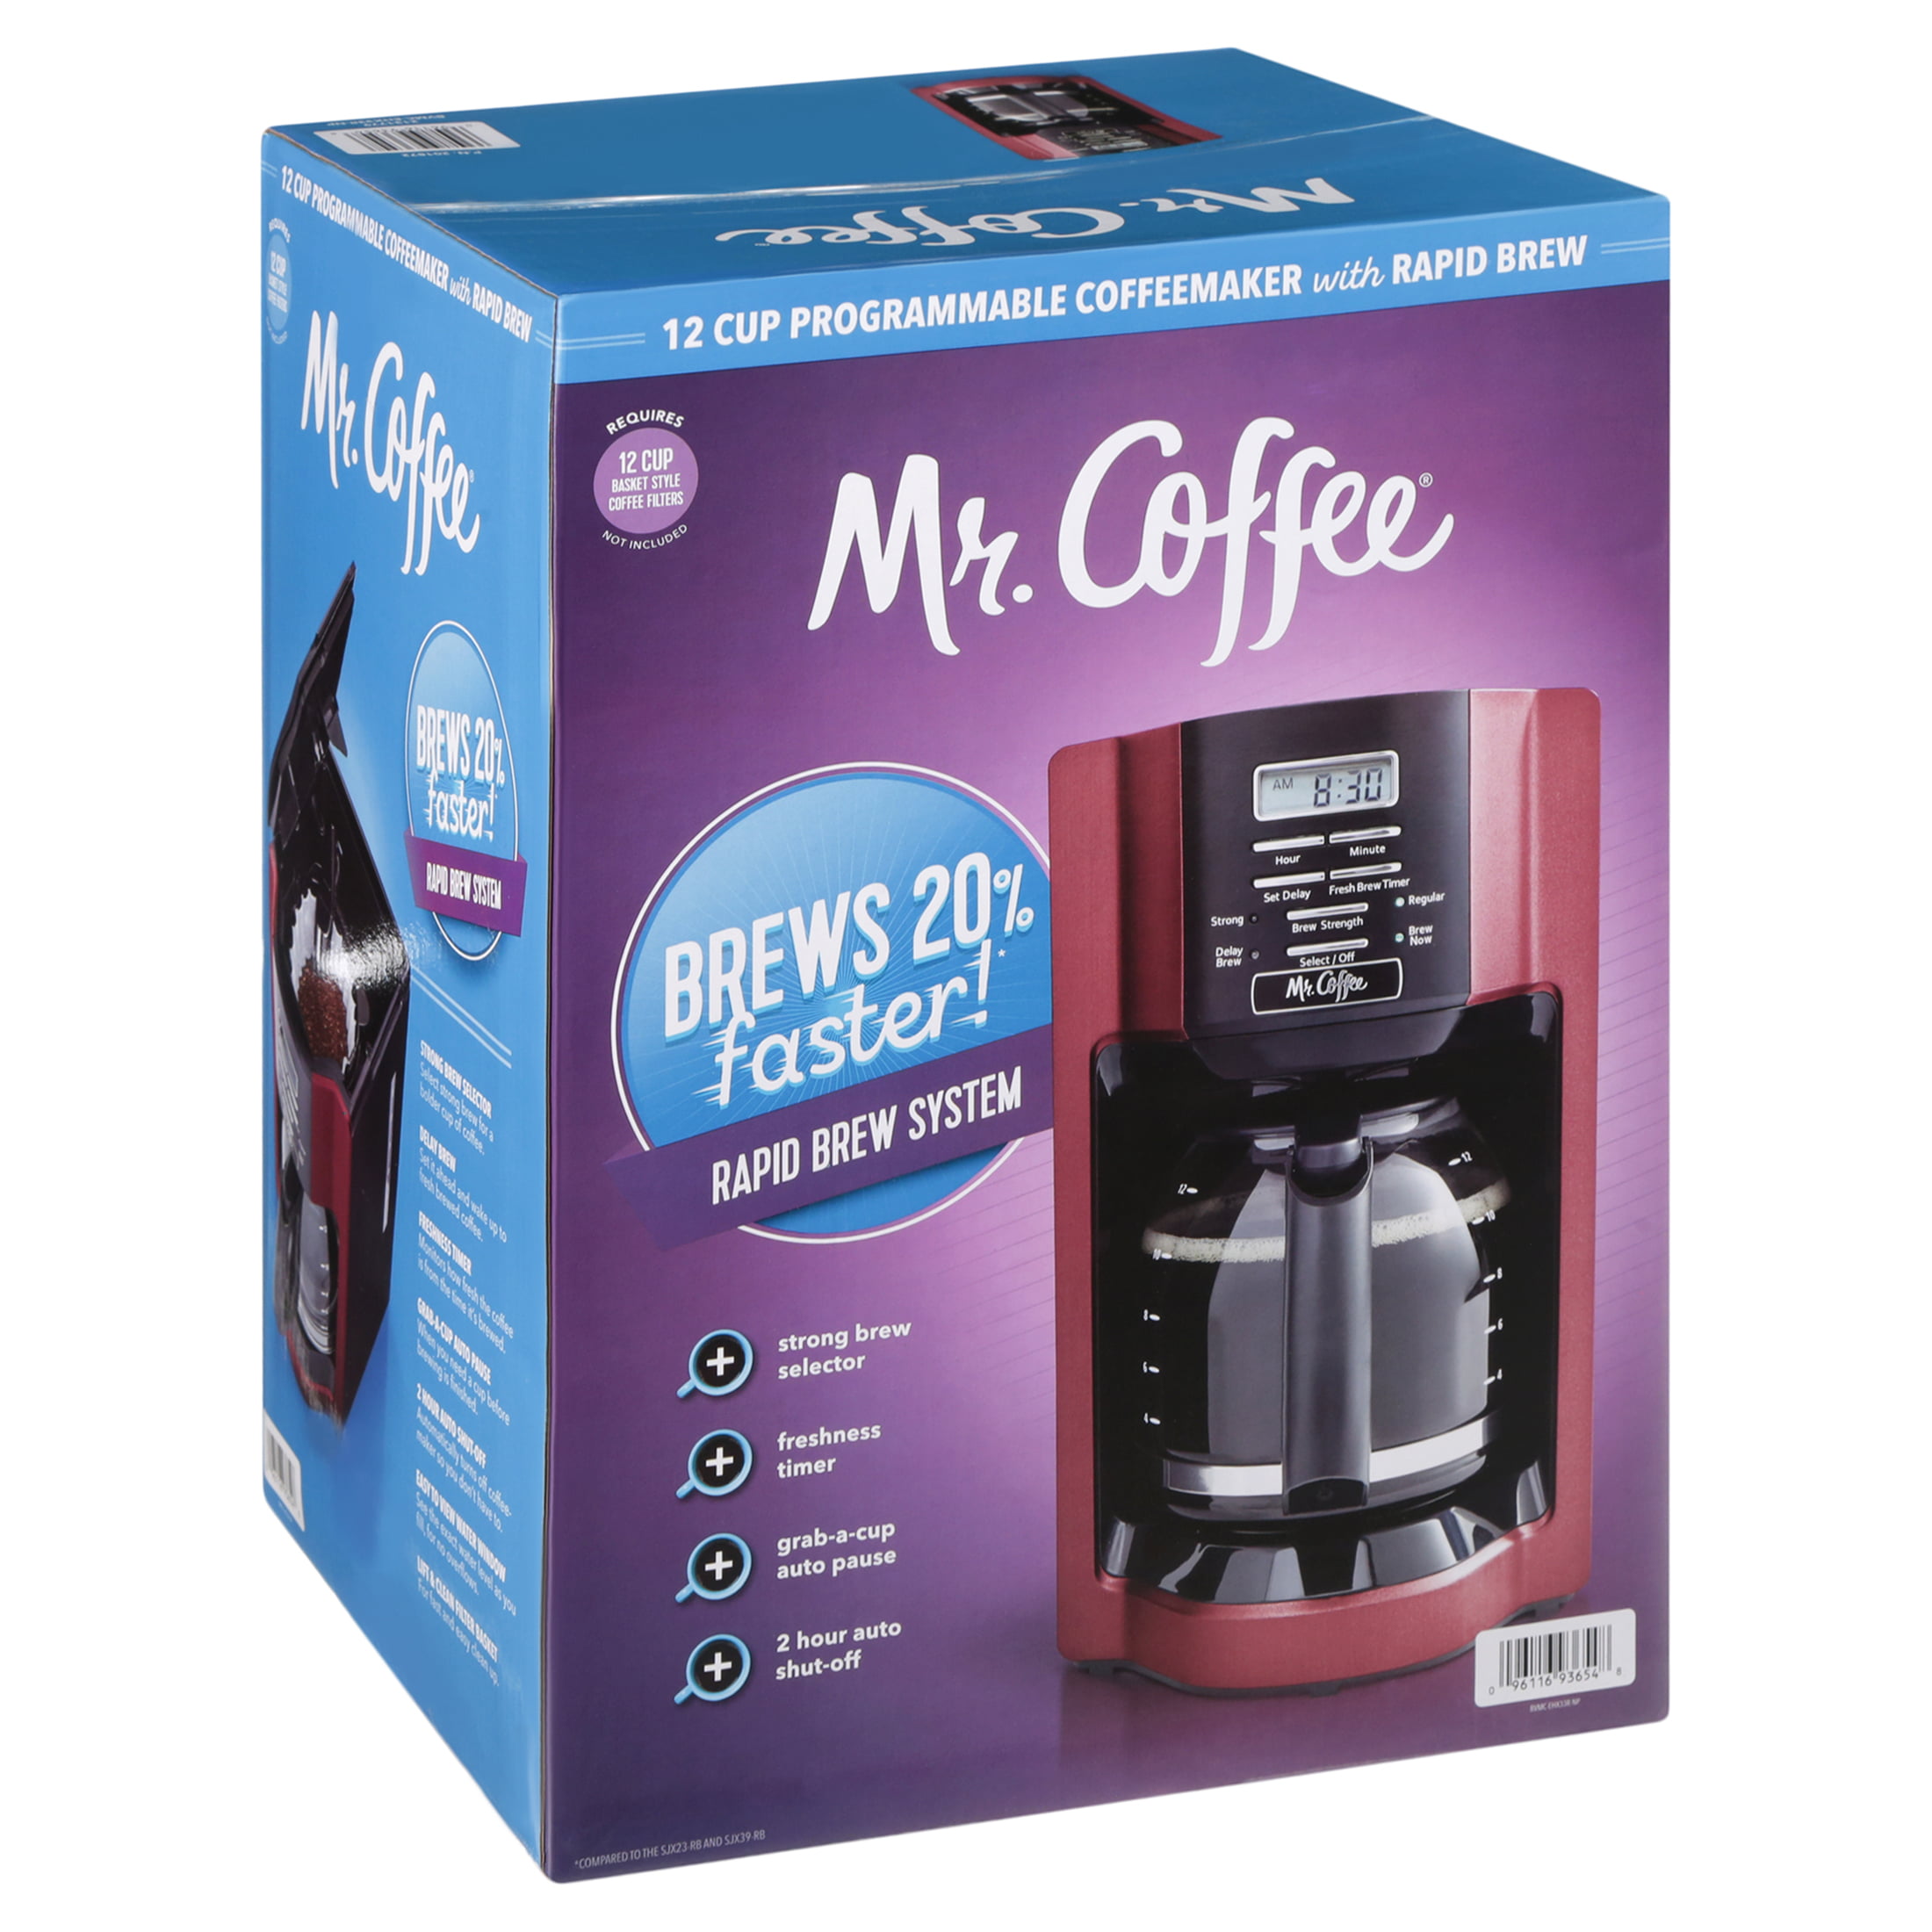 Mr. Coffee 12-Cup Programmable Coffeemaker, Rapid Brew, Red